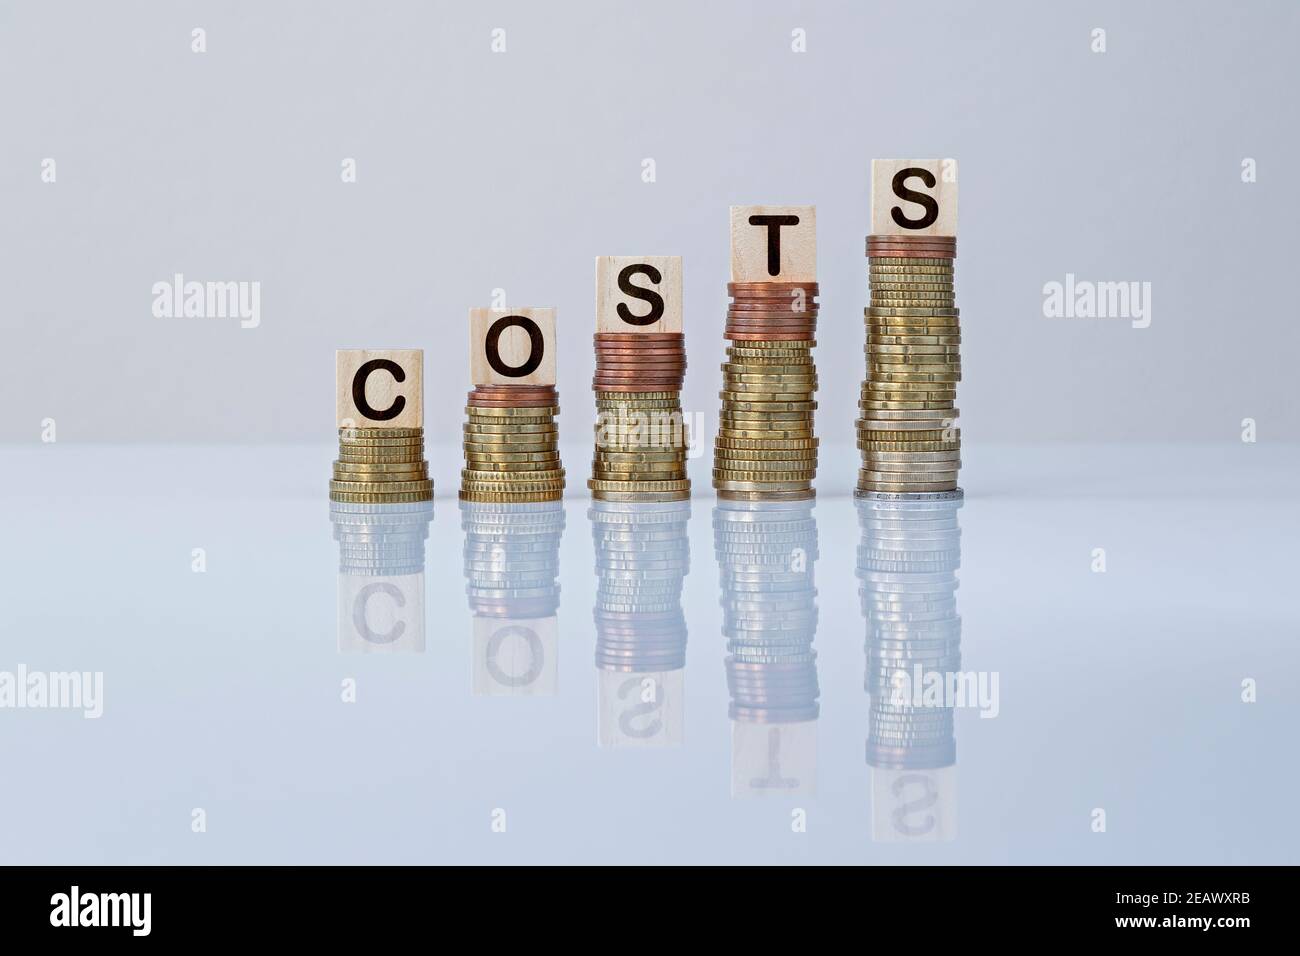 Word 'COSTS' on wooden blocks on top of ascending stacks of coins on gray background. Concept photo of business, cost increase, financial reduction. Stock Photo